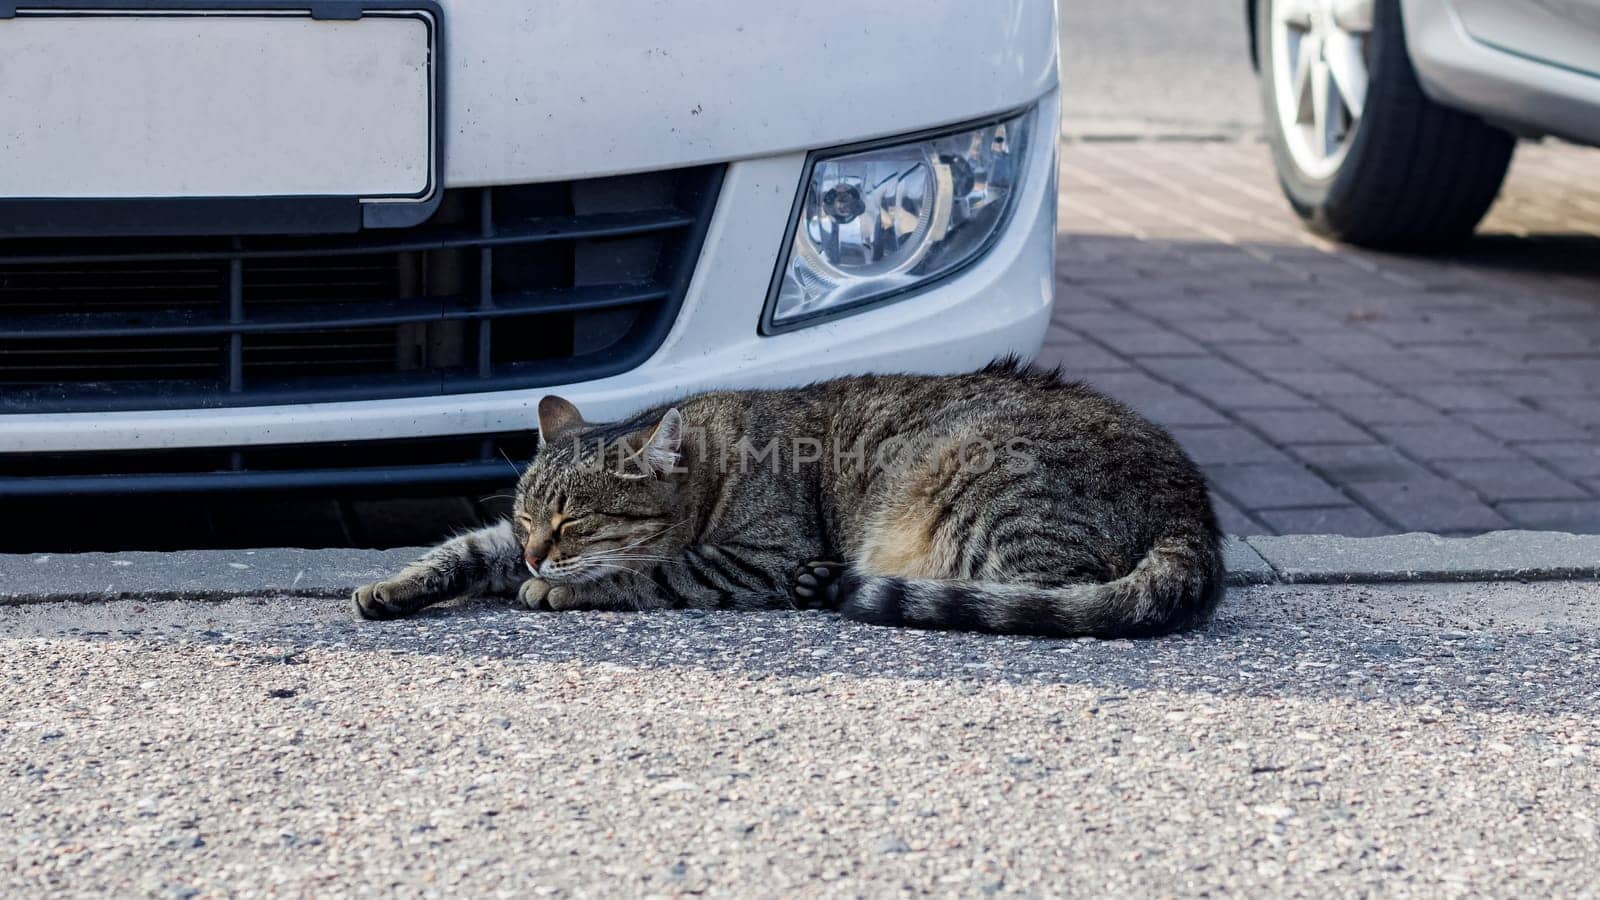 Gray tabby cat sleeps by car close up, danger to pets